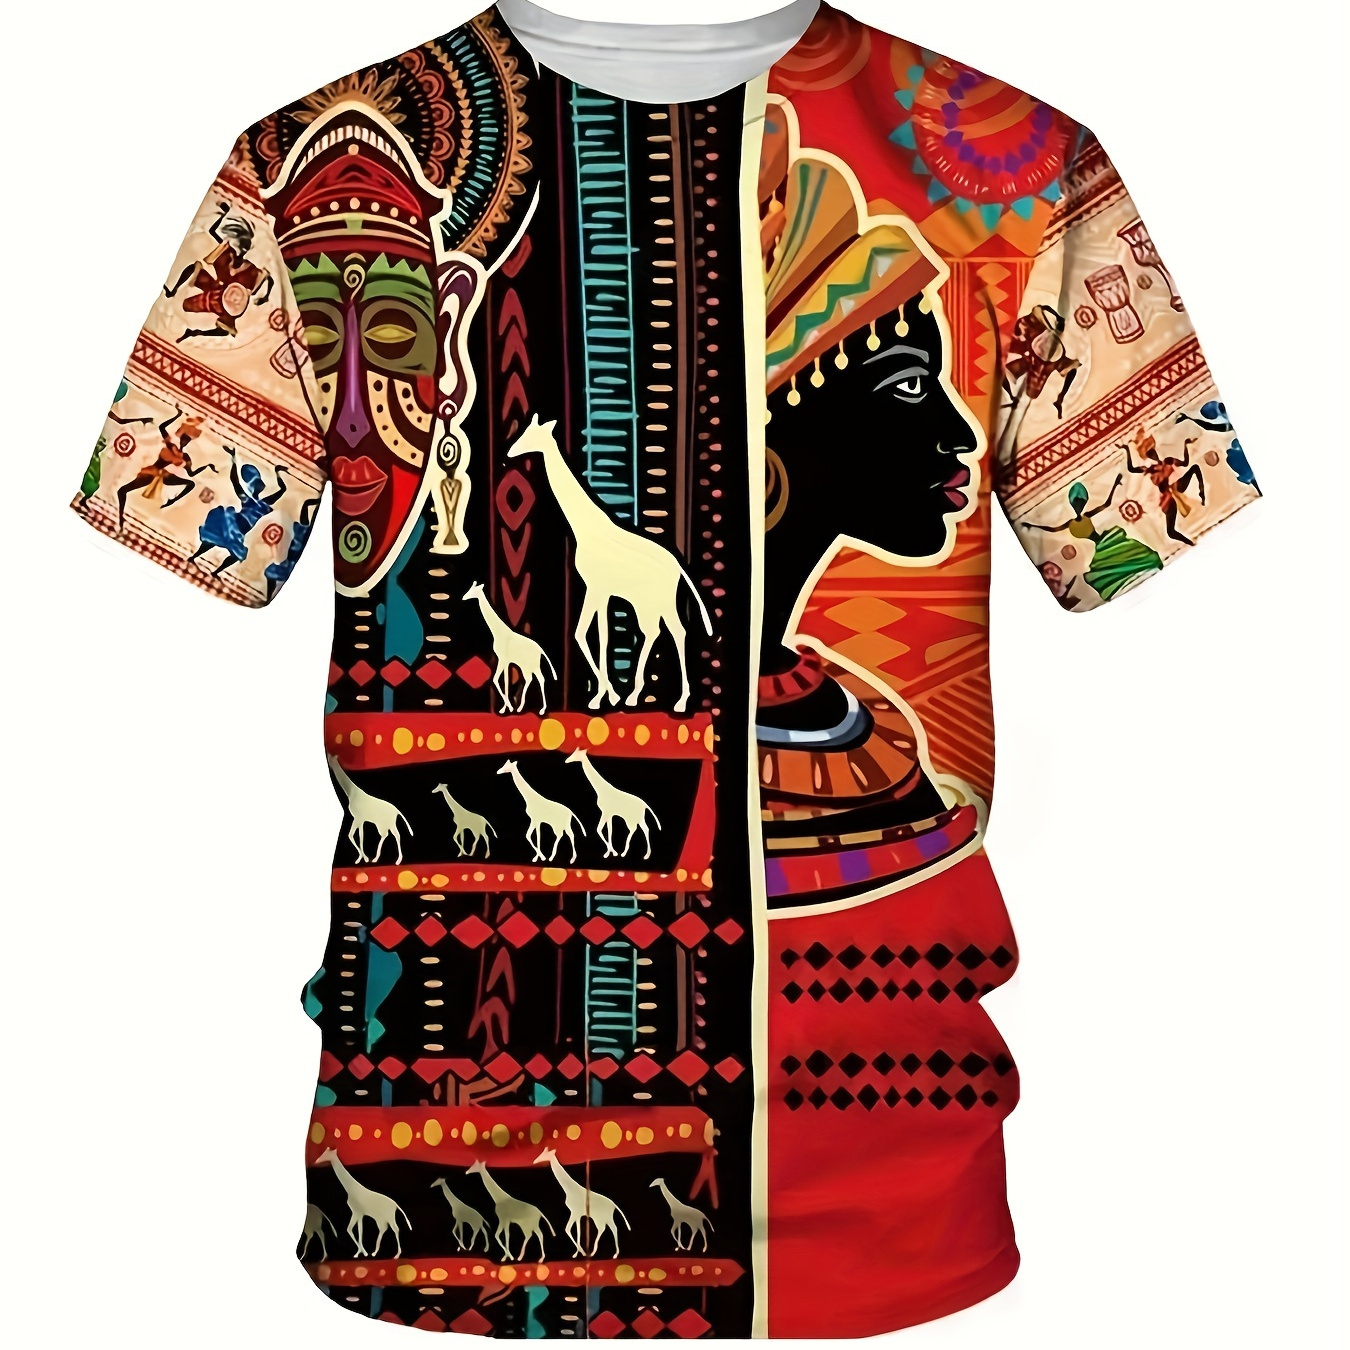 

Men's Ethnic Style Giraffe And Figure Portrait Graphic Pattern Print Crew Neck And Short Sleeve T-shirt For Summer Leisurewear And Outdoors Activities, Stylish And Trendy Tops For Men